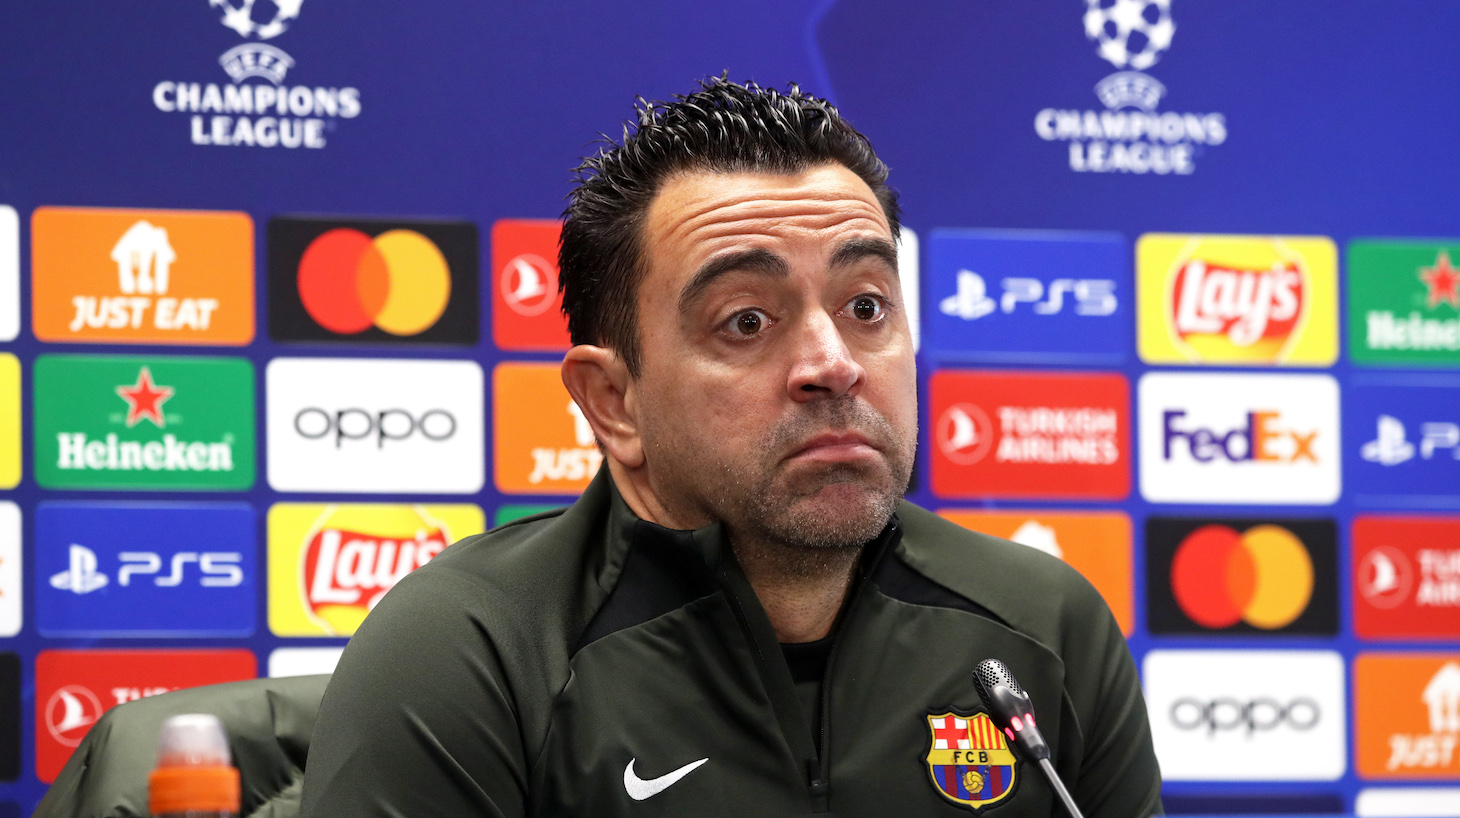 Xavi Hernandez is speaking during the press conference prior to the UEFA Champions League match against Real Madrid in Barcelona, Spain, on November 27, 2023.